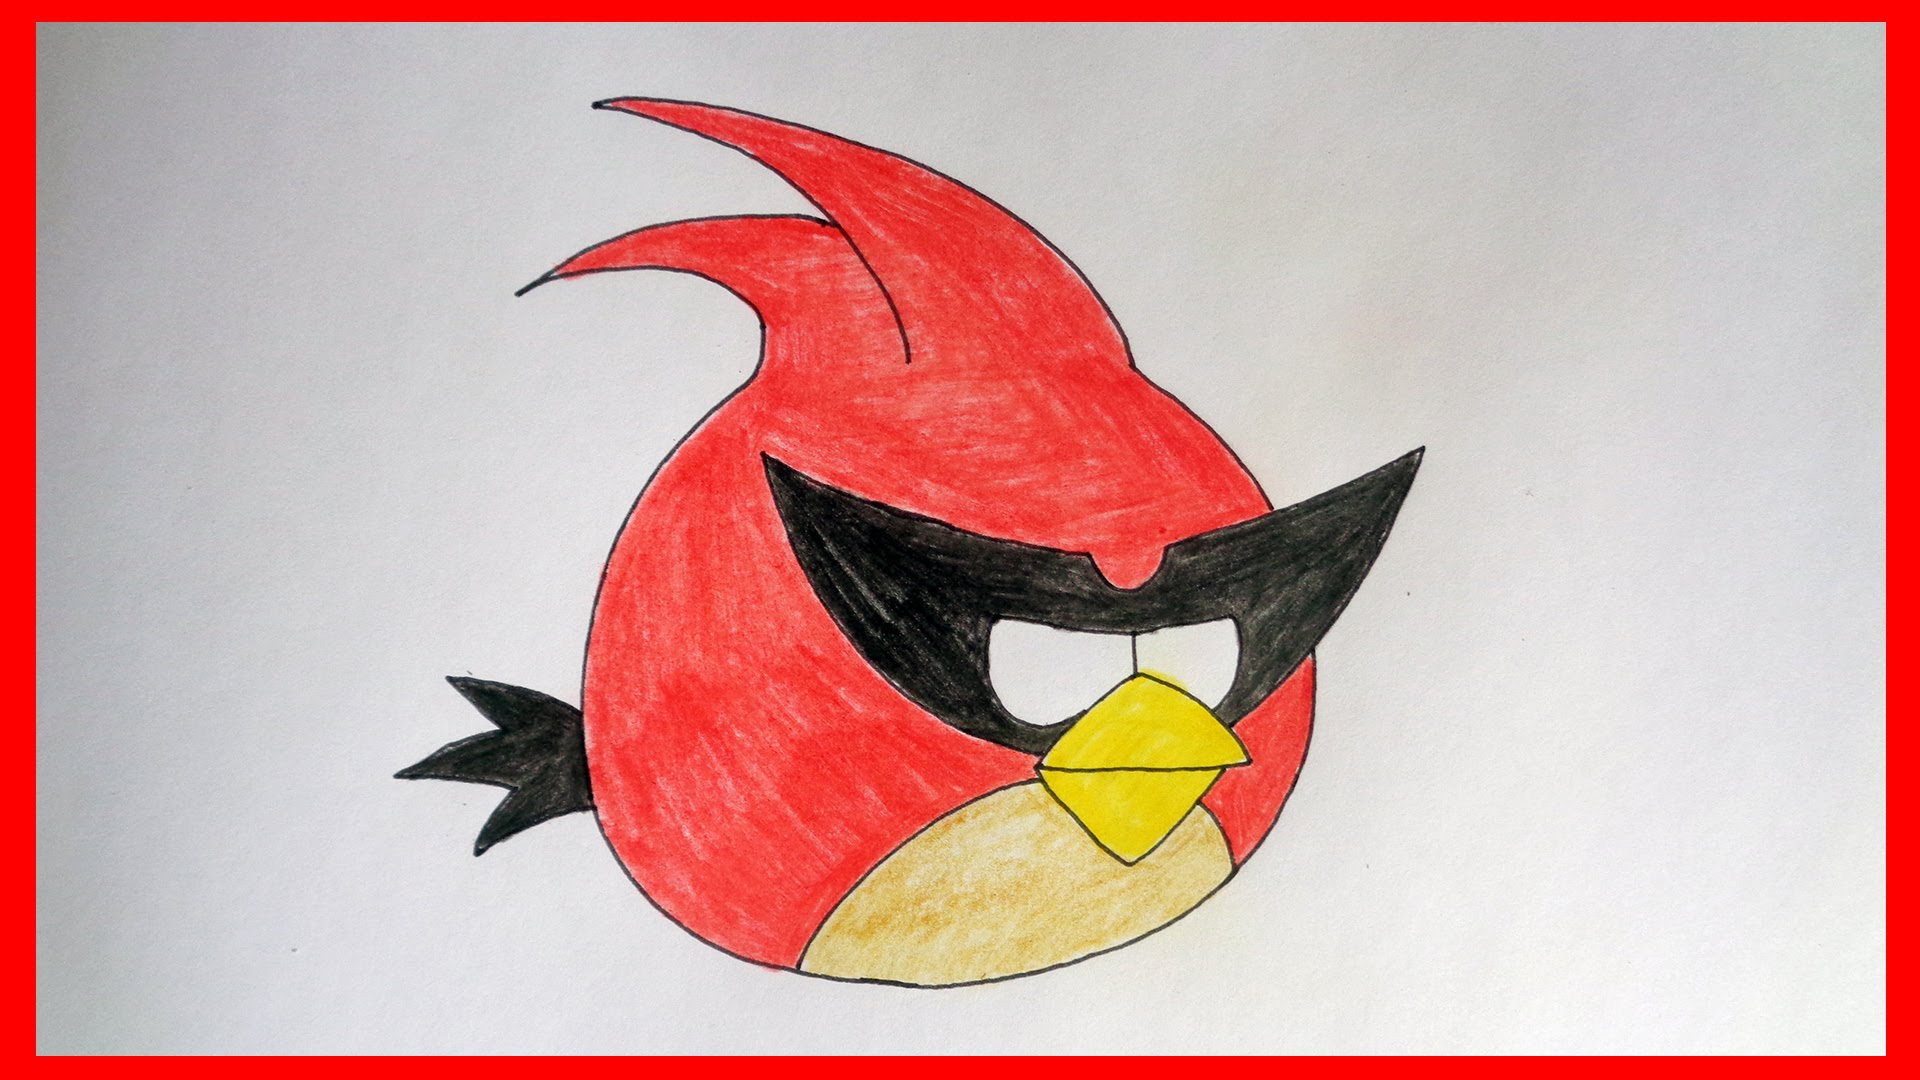 angry birds space drawings